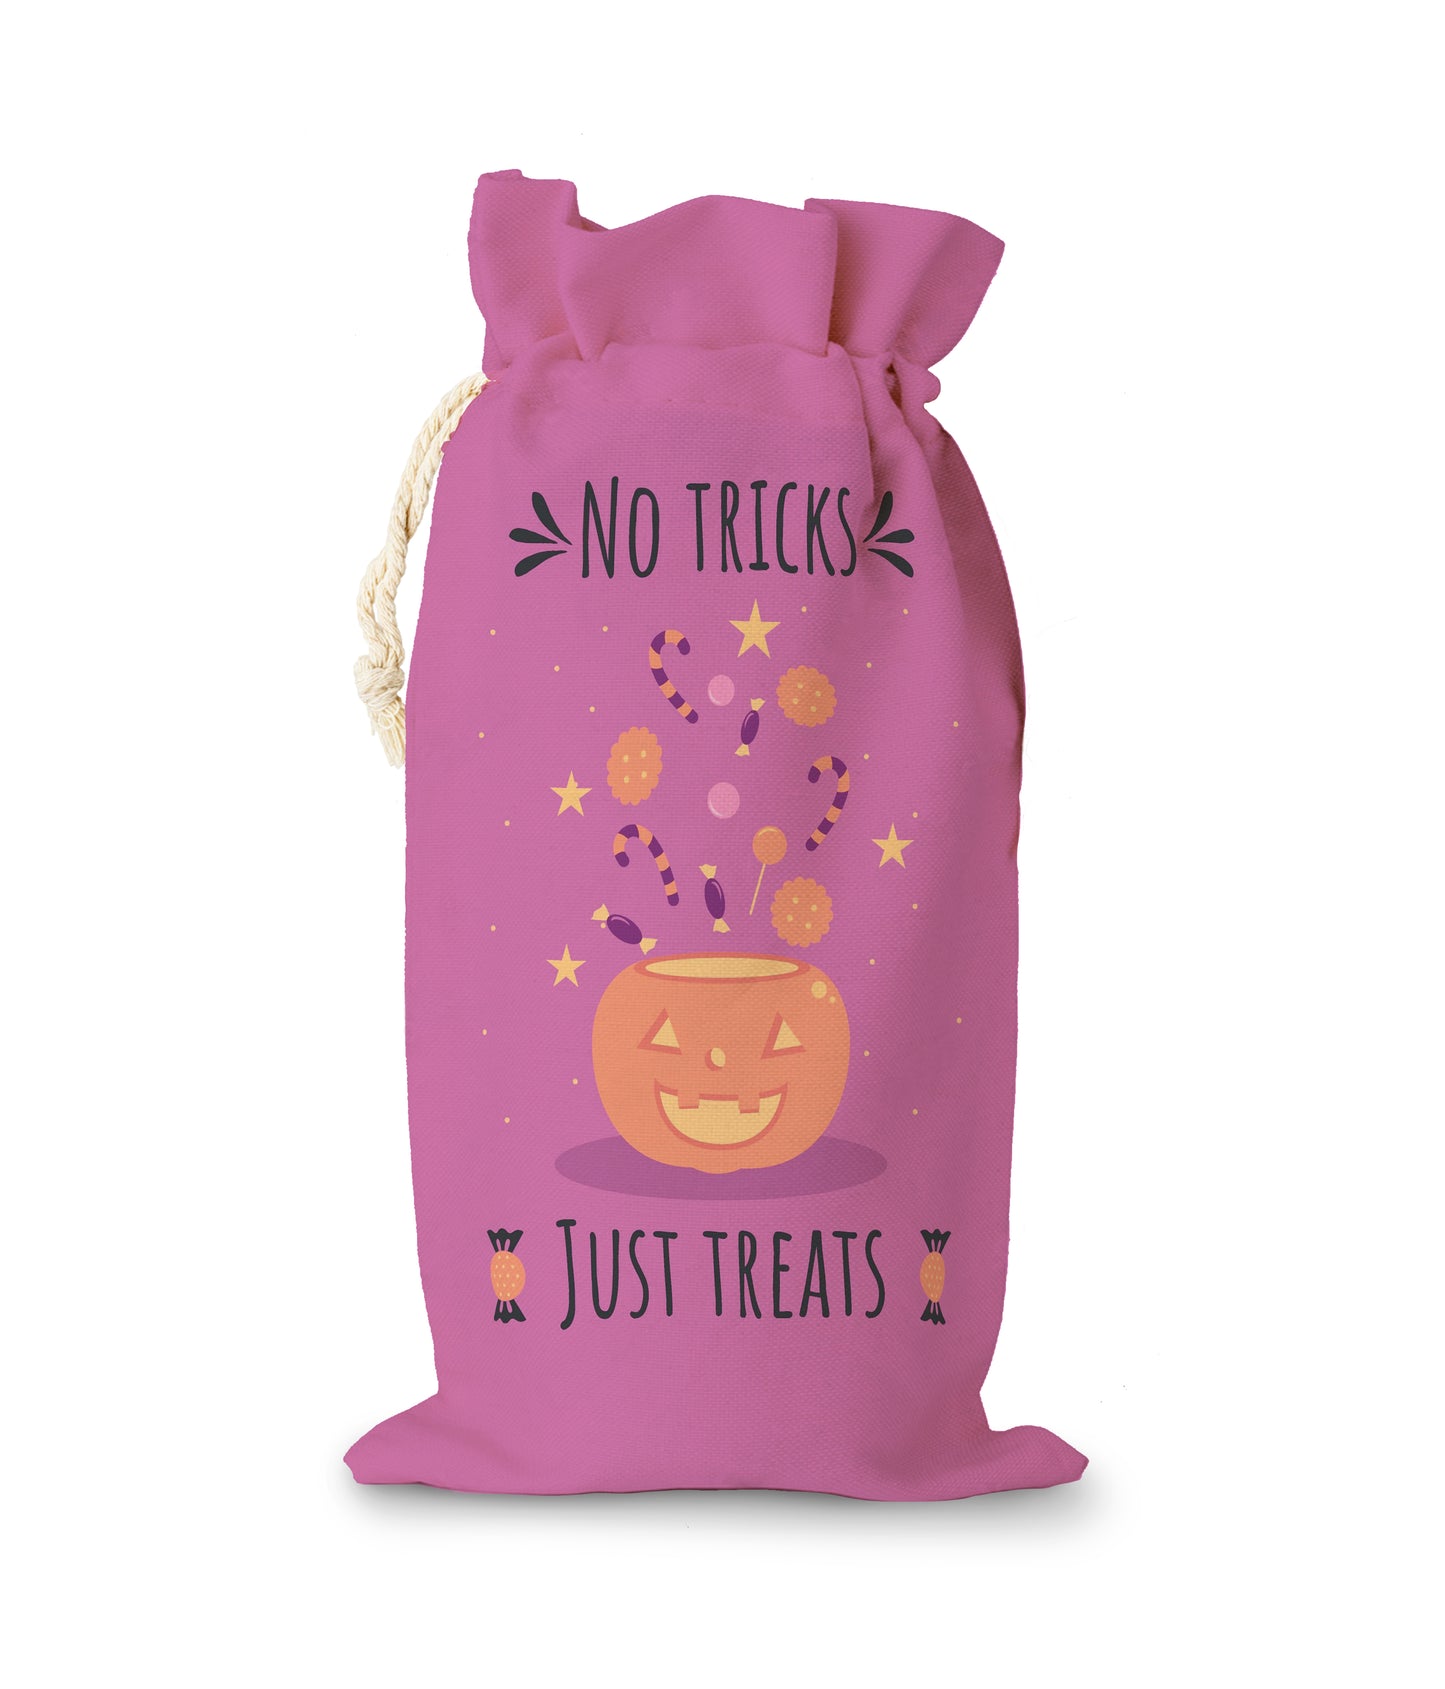 Halloween Candy Sack With Pumpkin Face, Text is "No Tricks Just Treats"